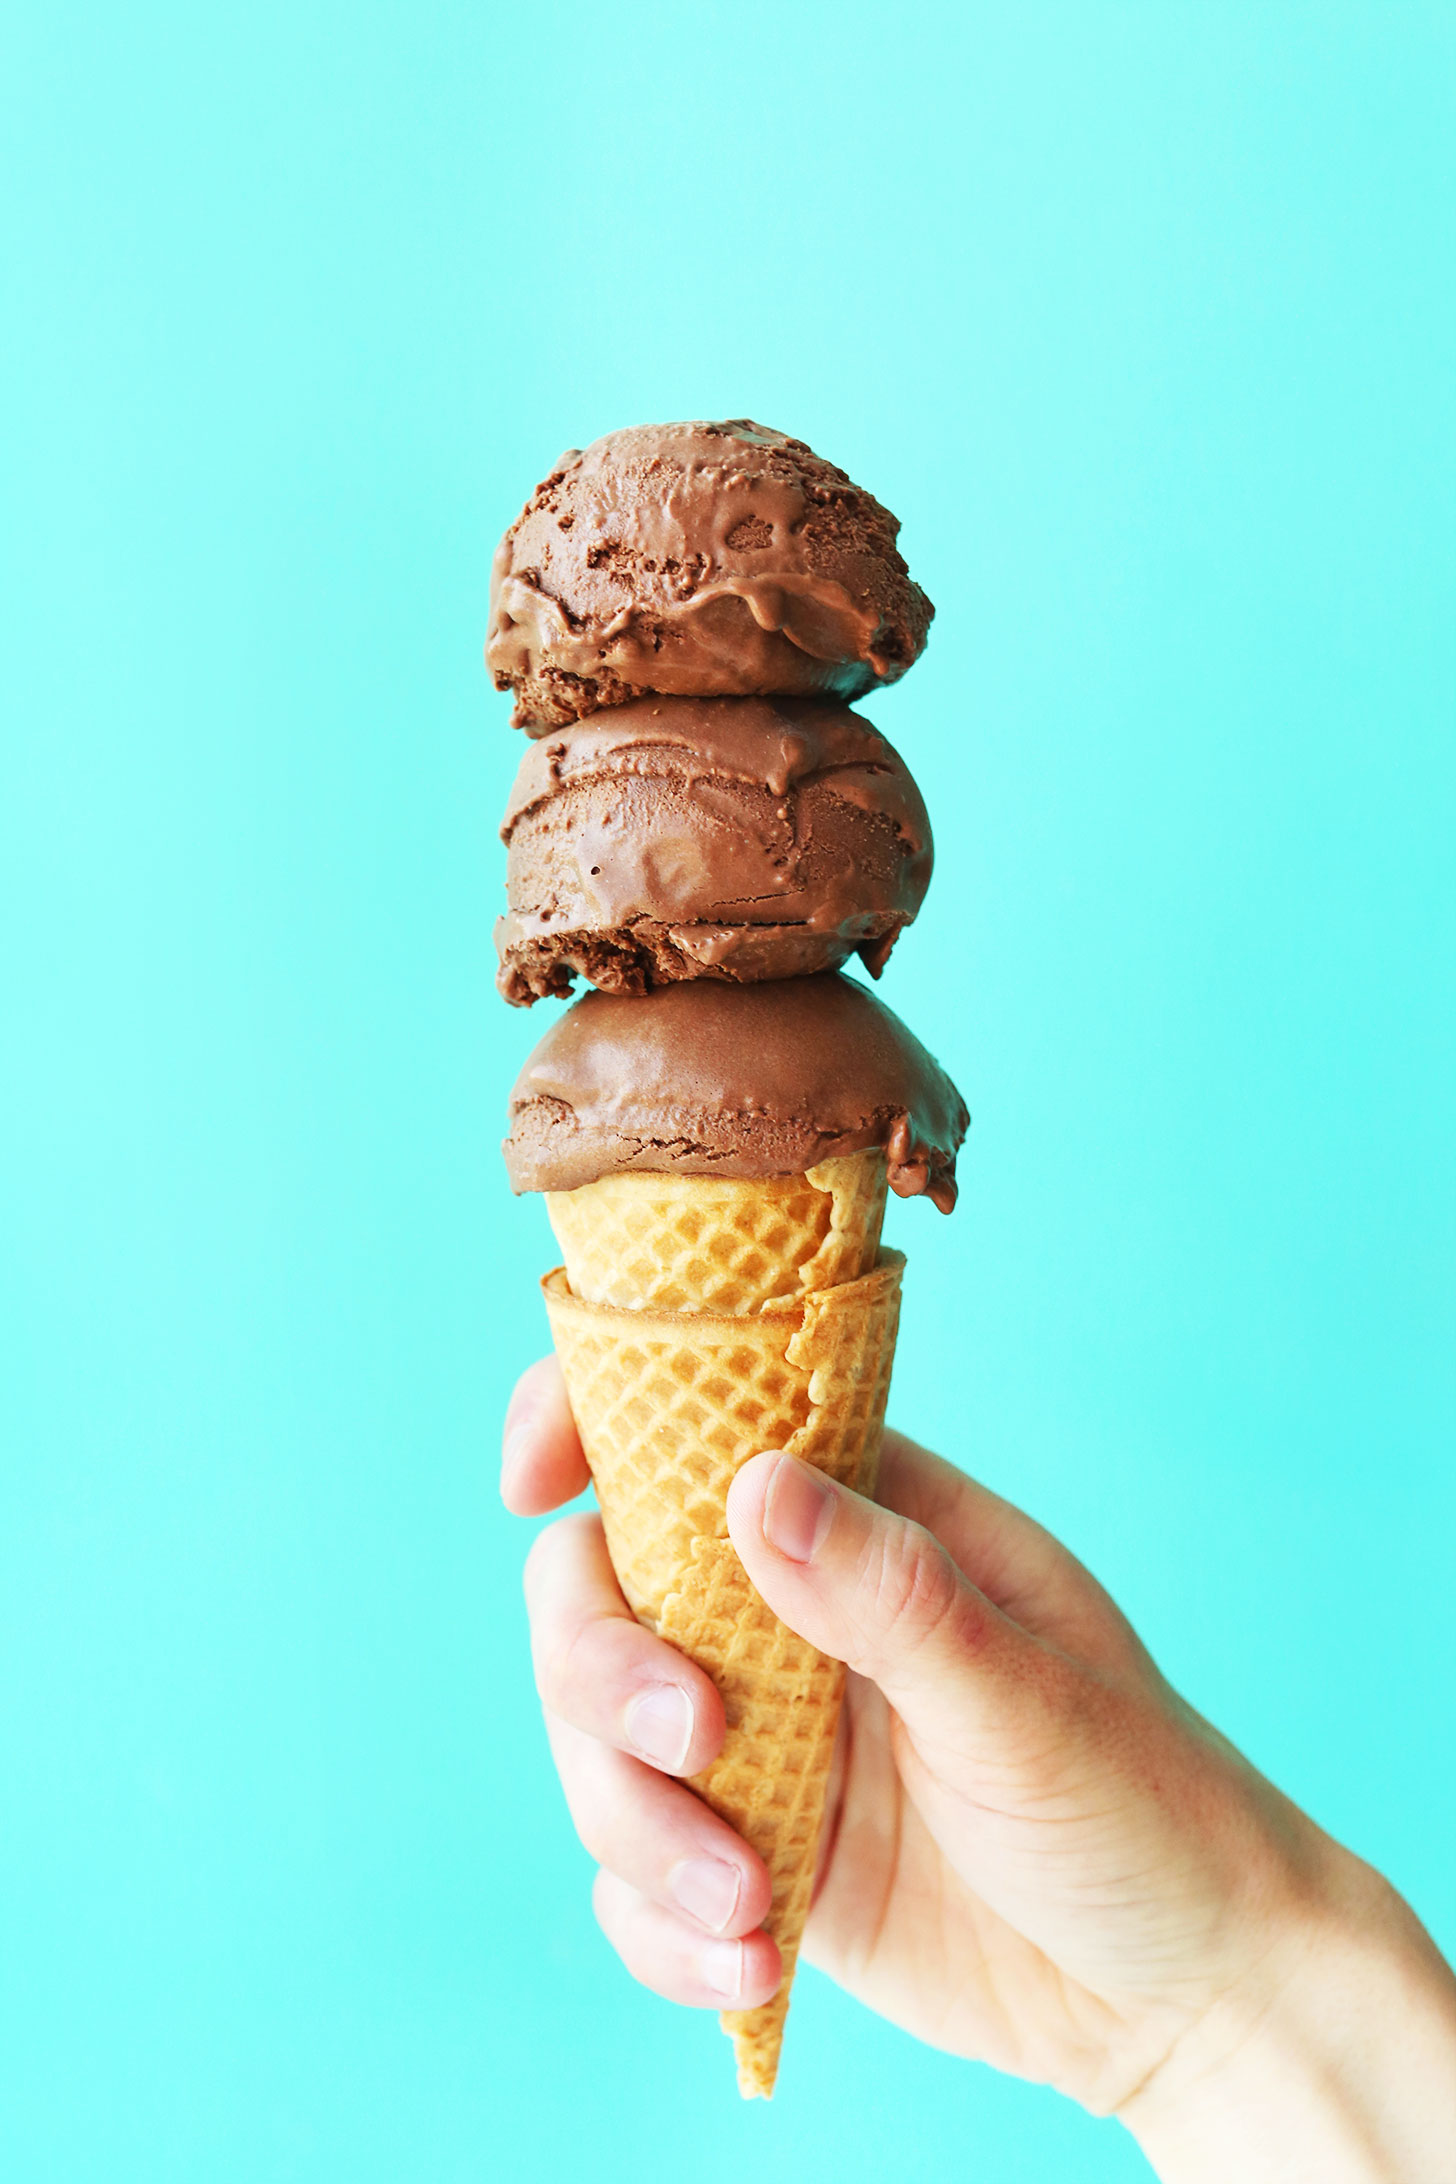 Ice cream cone topped with scoops of vegan chocolate ice cream for our round-up of ice cream recipes